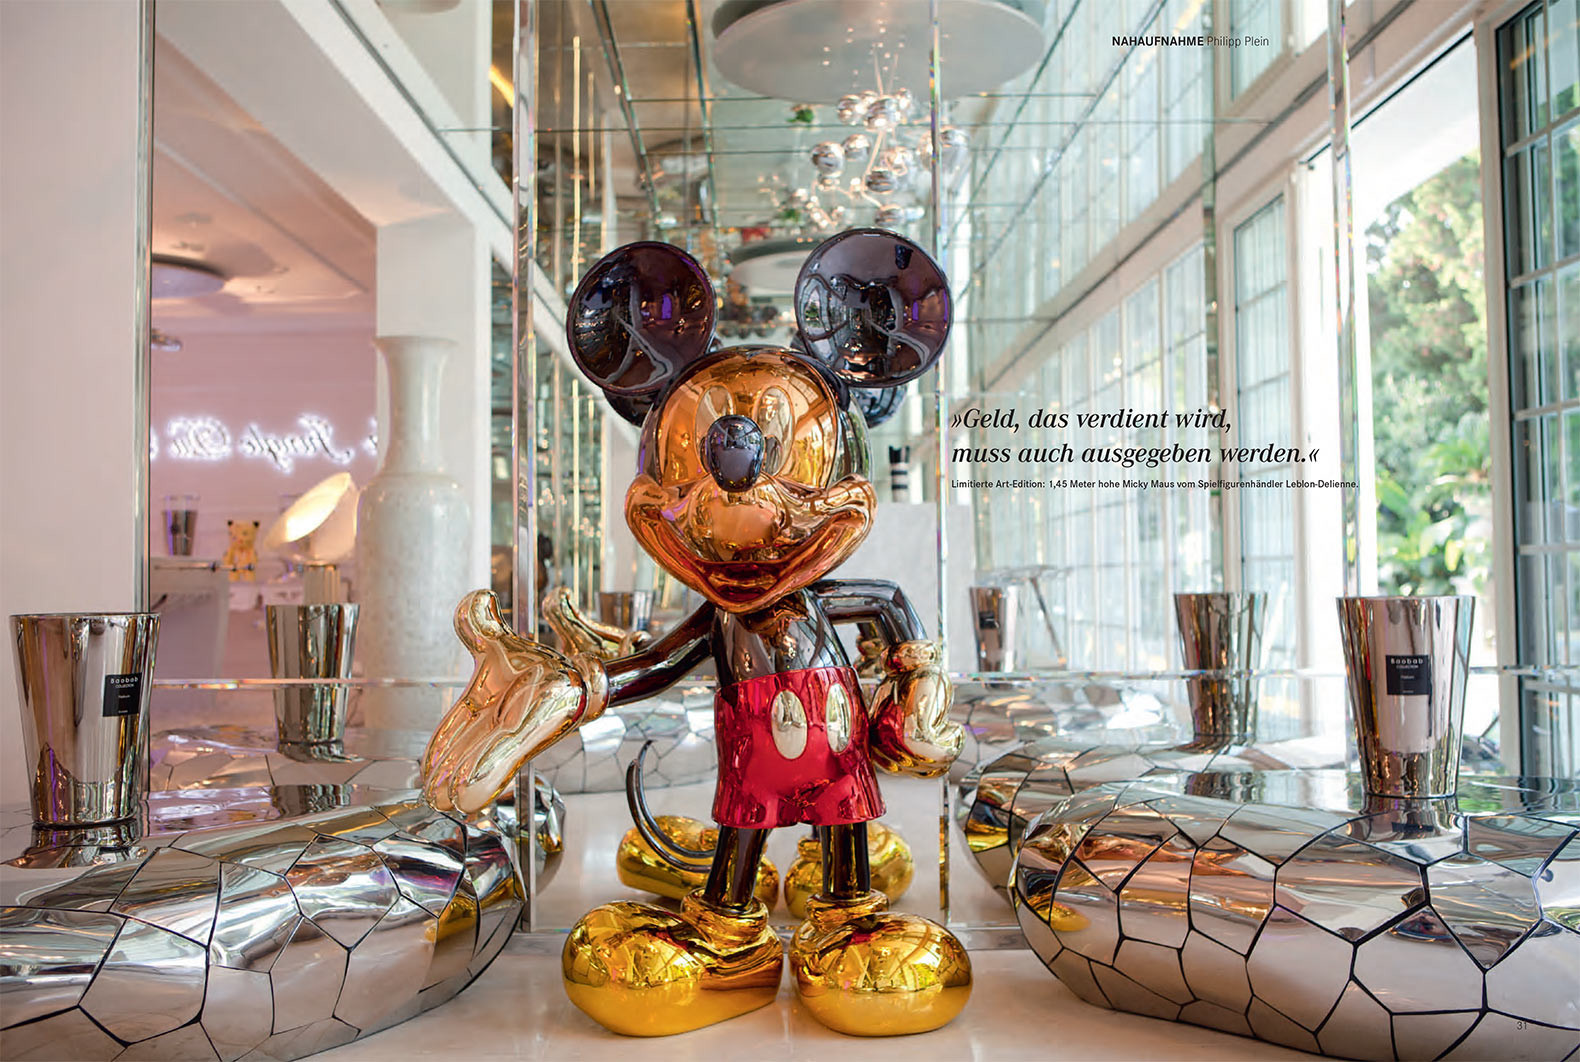 Tearsheet of page layout of Handelsblatt magazine showing double page photograph of statue of Mickey Mouse inside the villa of Philipp Plein